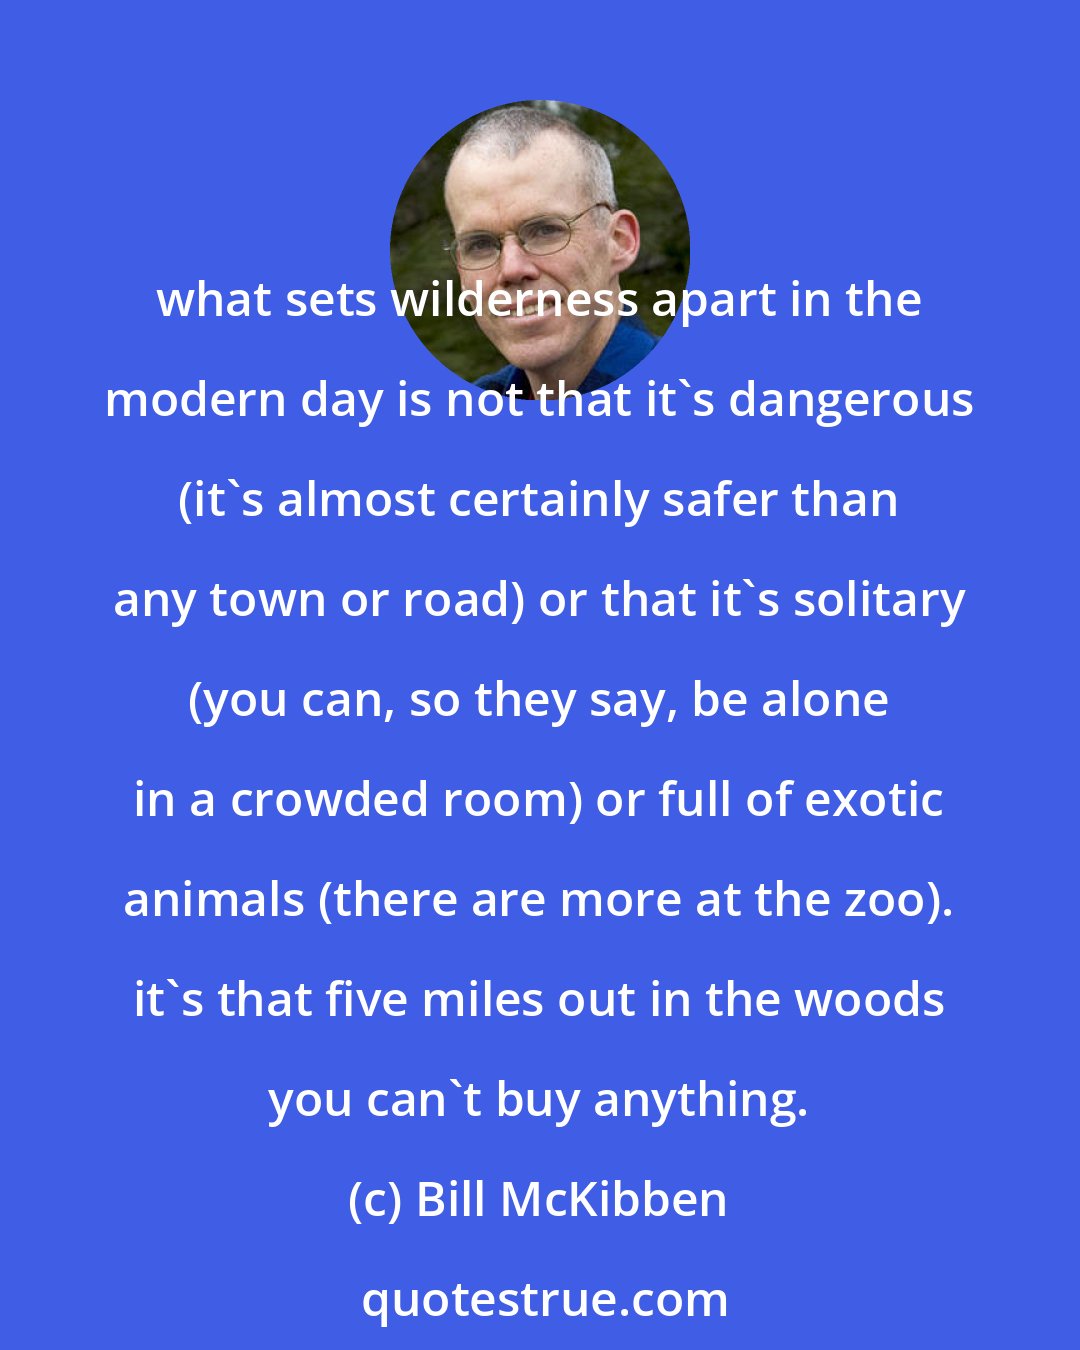 Bill McKibben: what sets wilderness apart in the modern day is not that it's dangerous (it's almost certainly safer than any town or road) or that it's solitary (you can, so they say, be alone in a crowded room) or full of exotic animals (there are more at the zoo). it's that five miles out in the woods you can't buy anything.